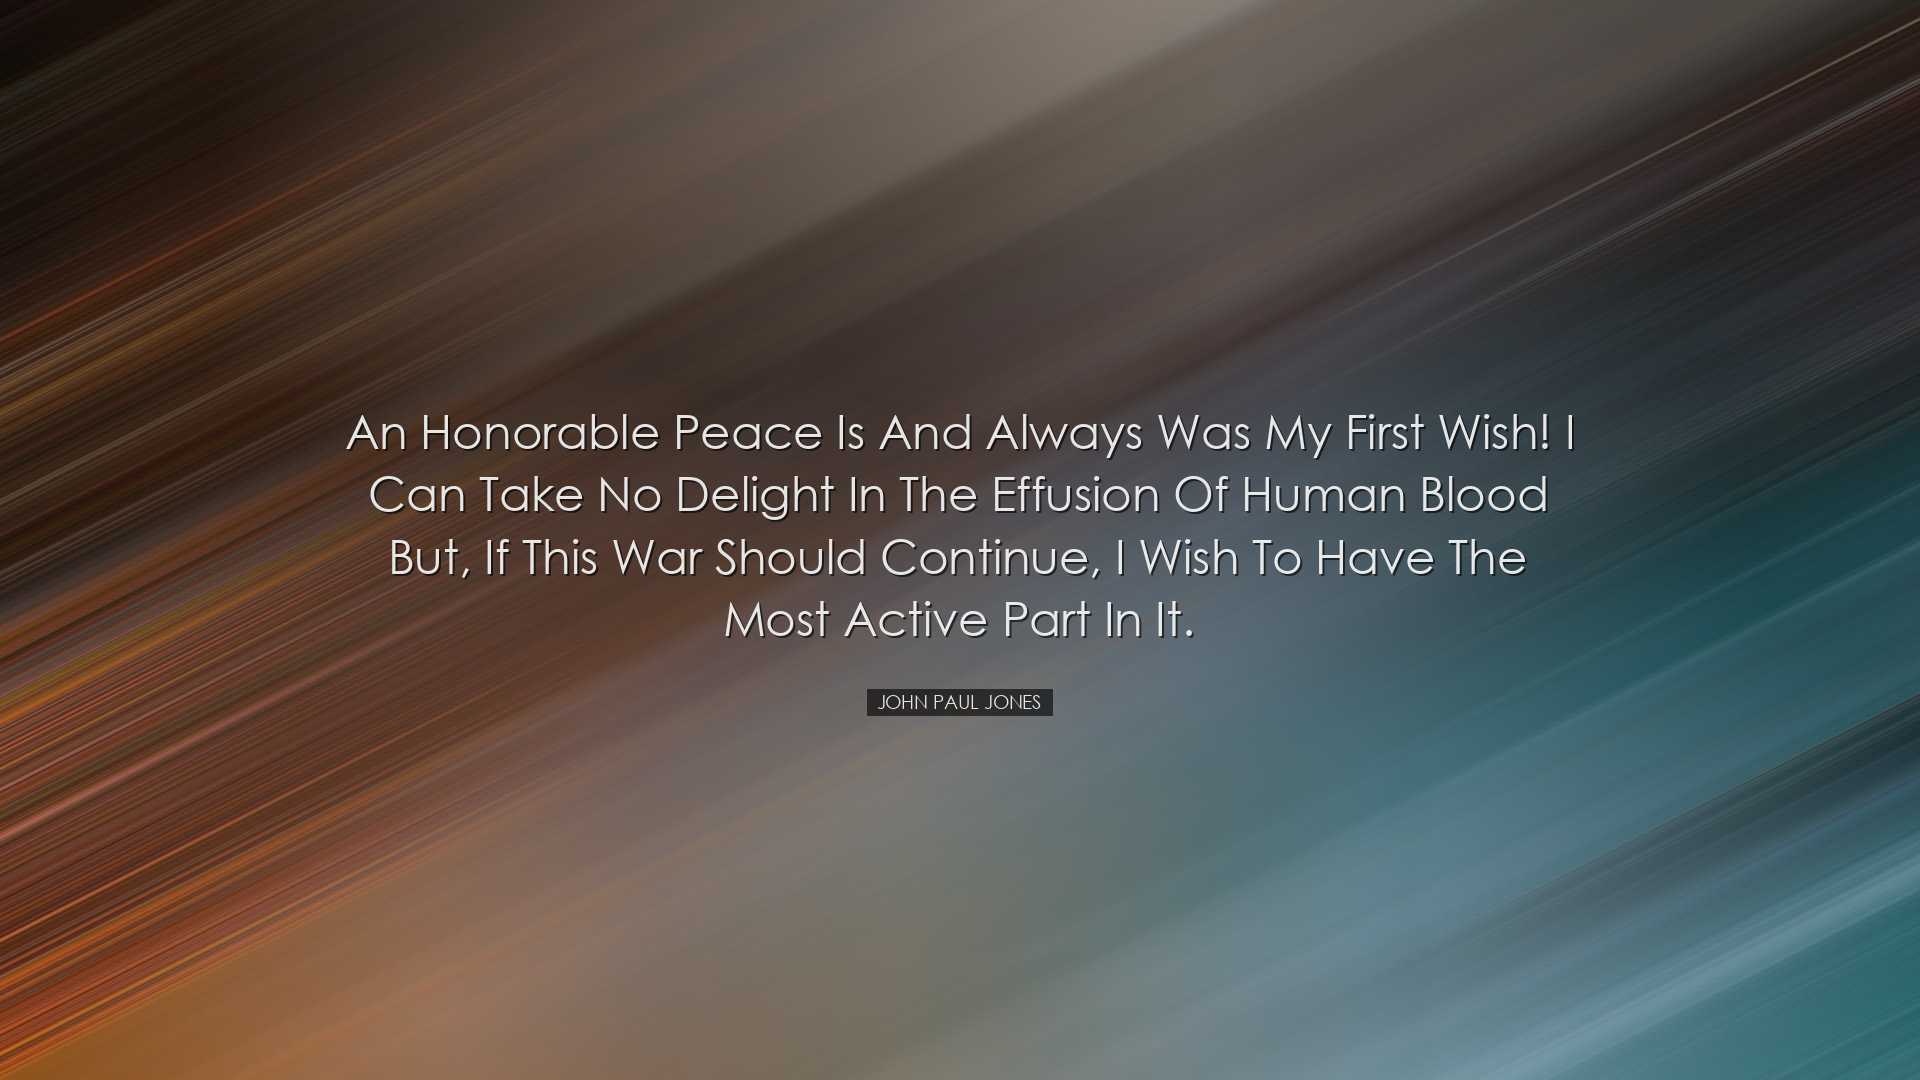 An honorable Peace is and always was my first wish! I can take no